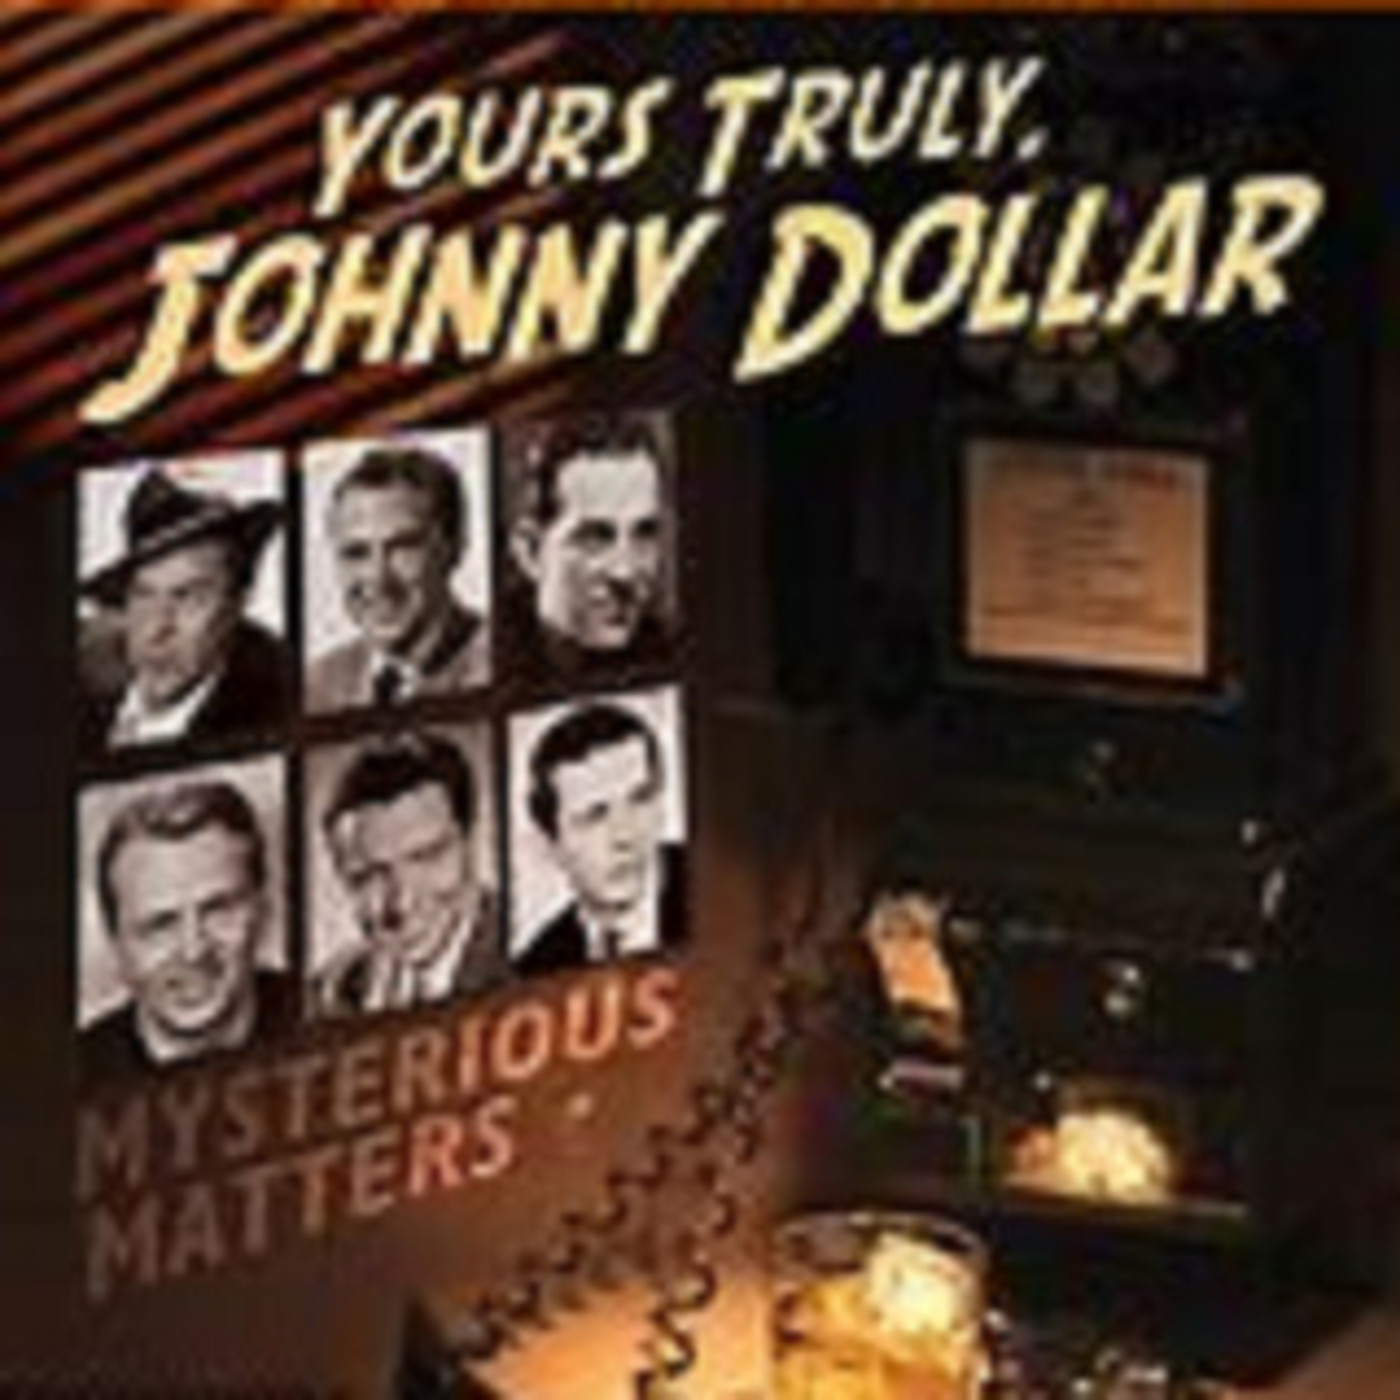 Yours Truly, Johnny Dollar - 071562, episode 800 - The Weather or Not Matter